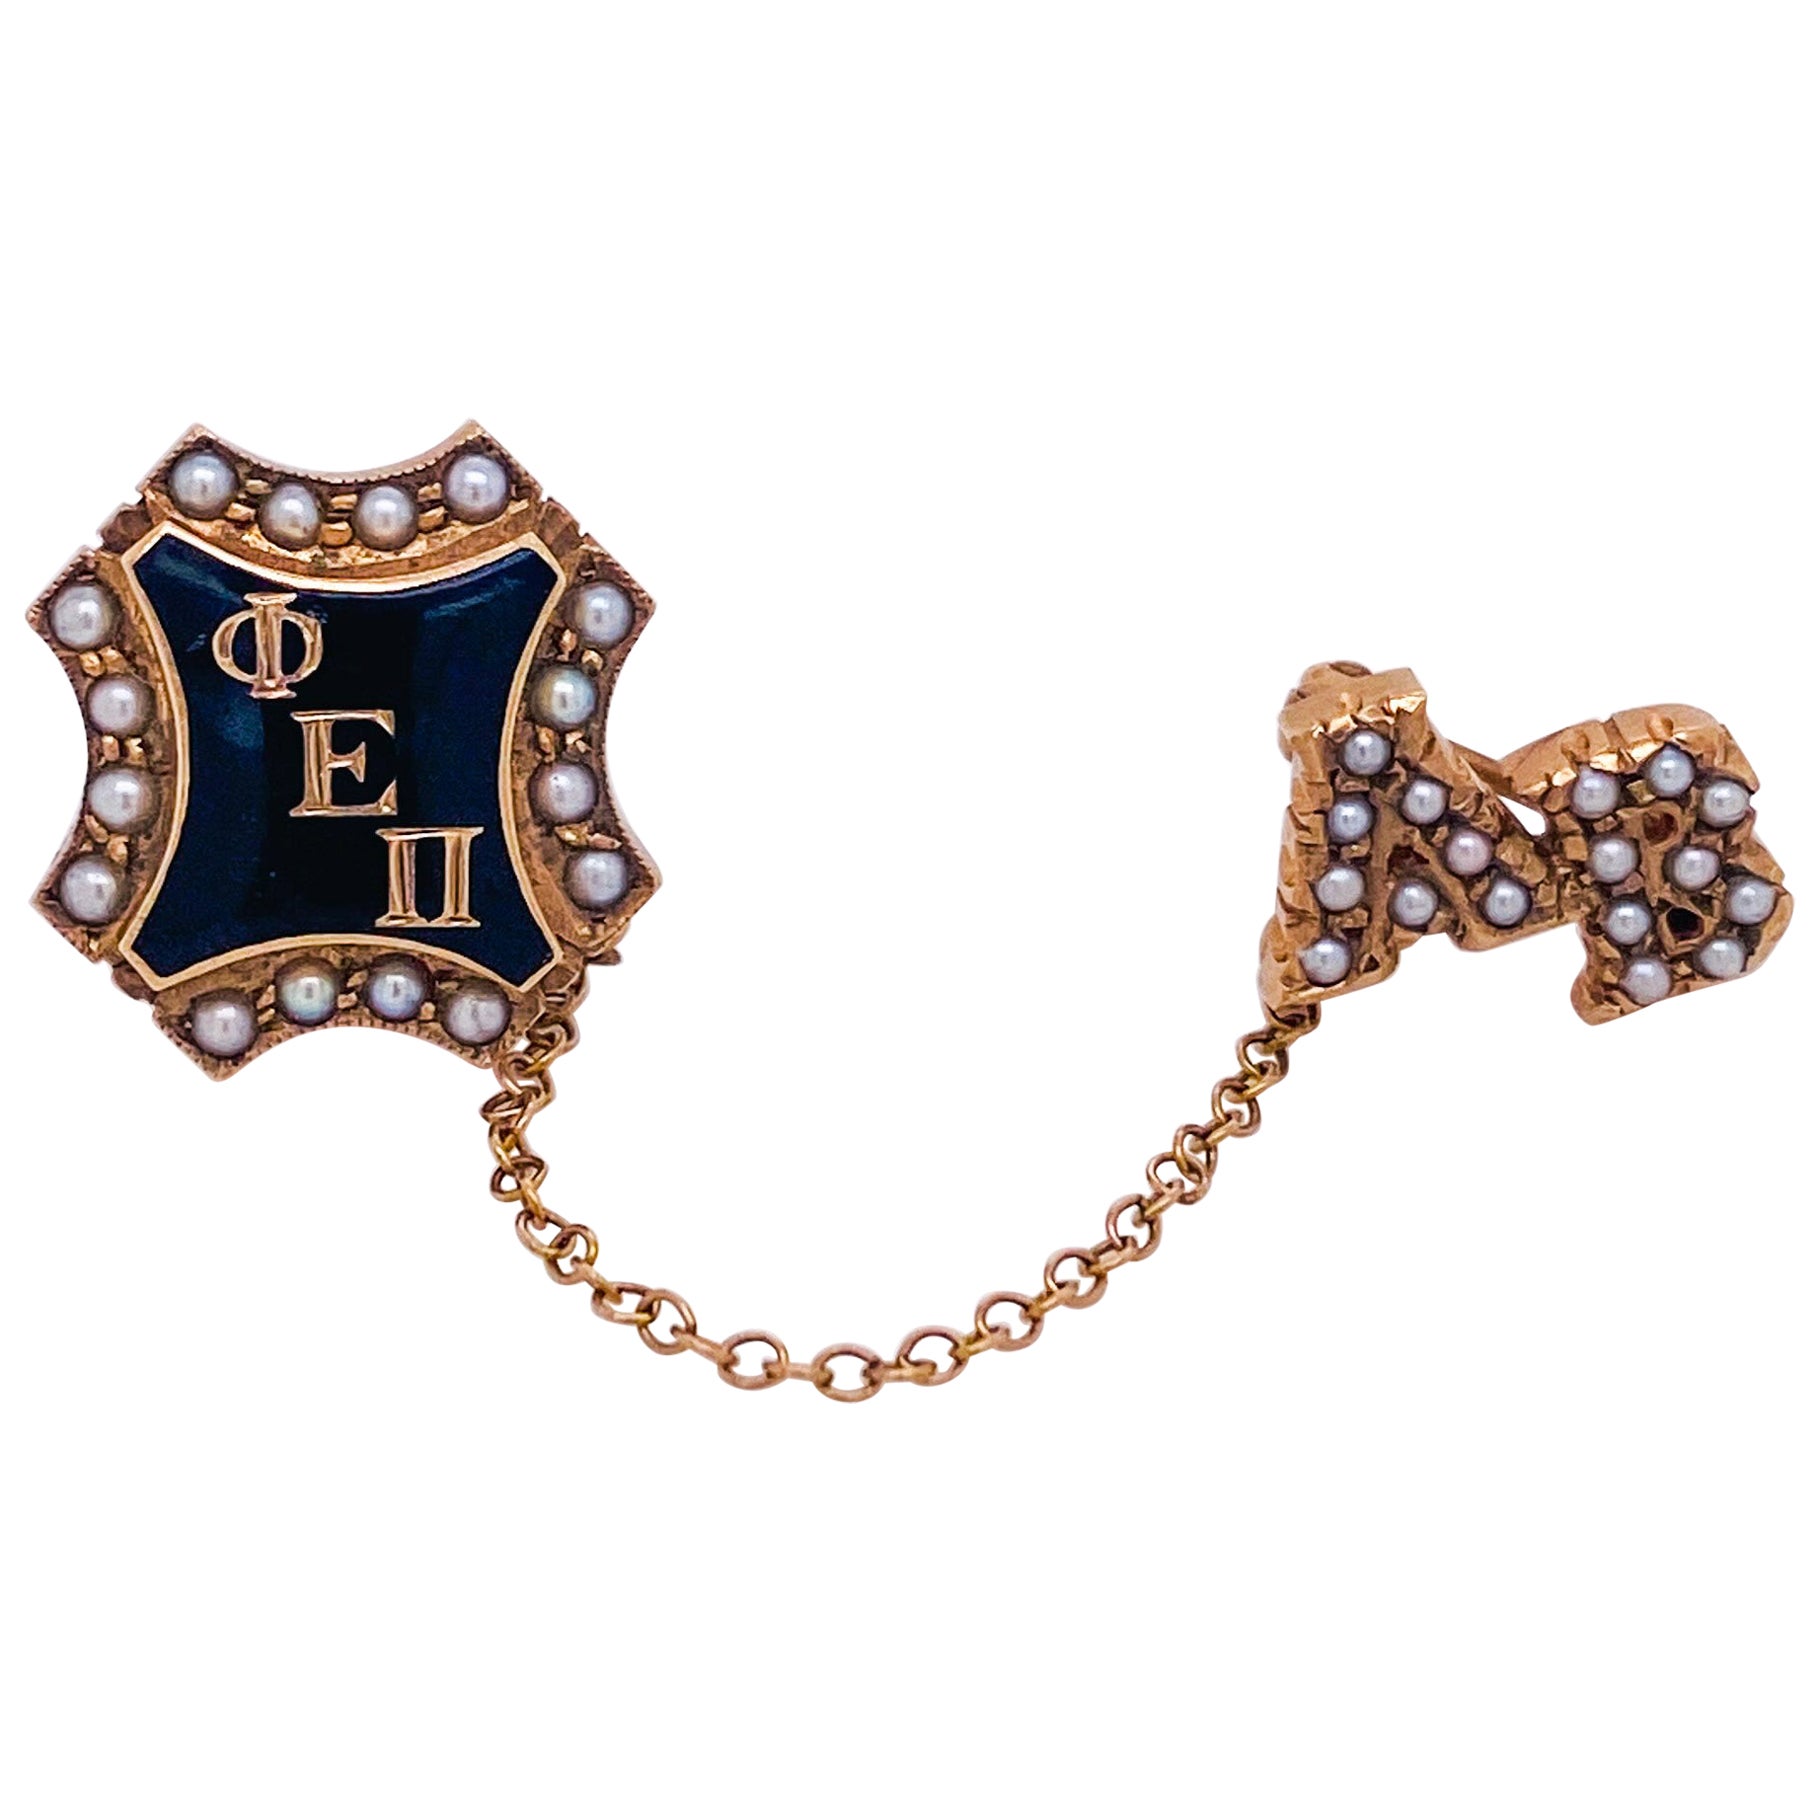 Phi Epsilon Pi, Alpha Beta Chapter Fraternity Pin Estate Brooch with Pearls